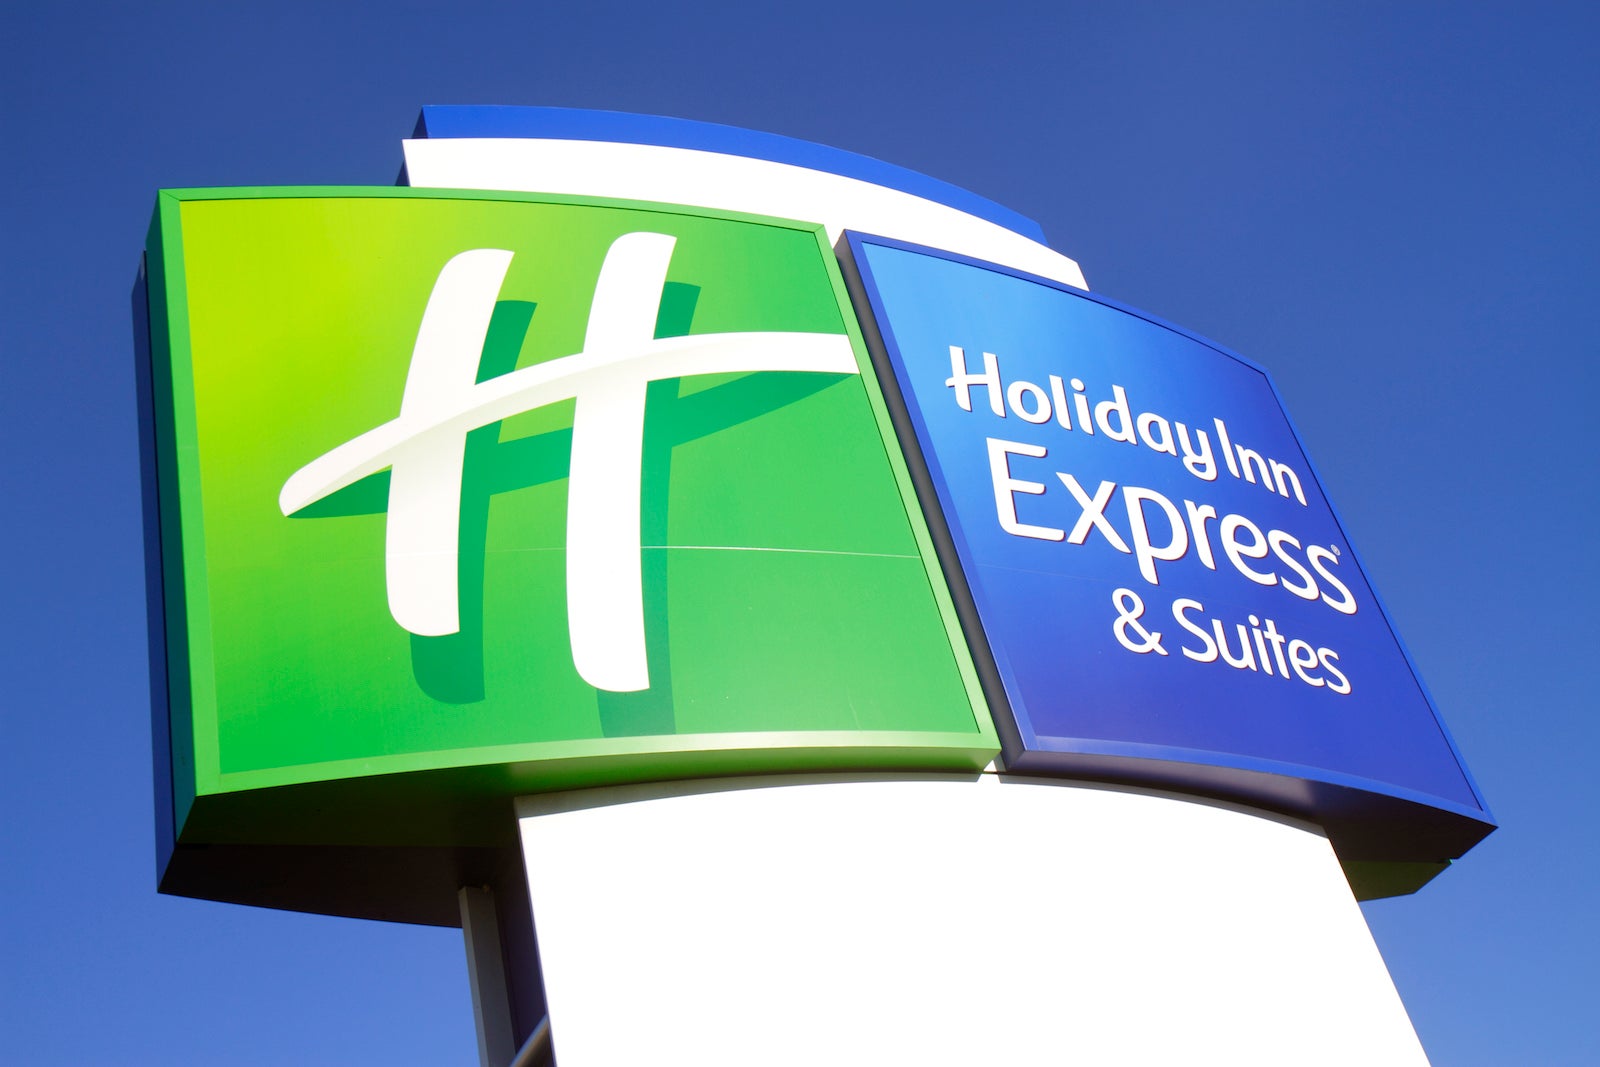 Holiday Inn Express and Suites hotel sign